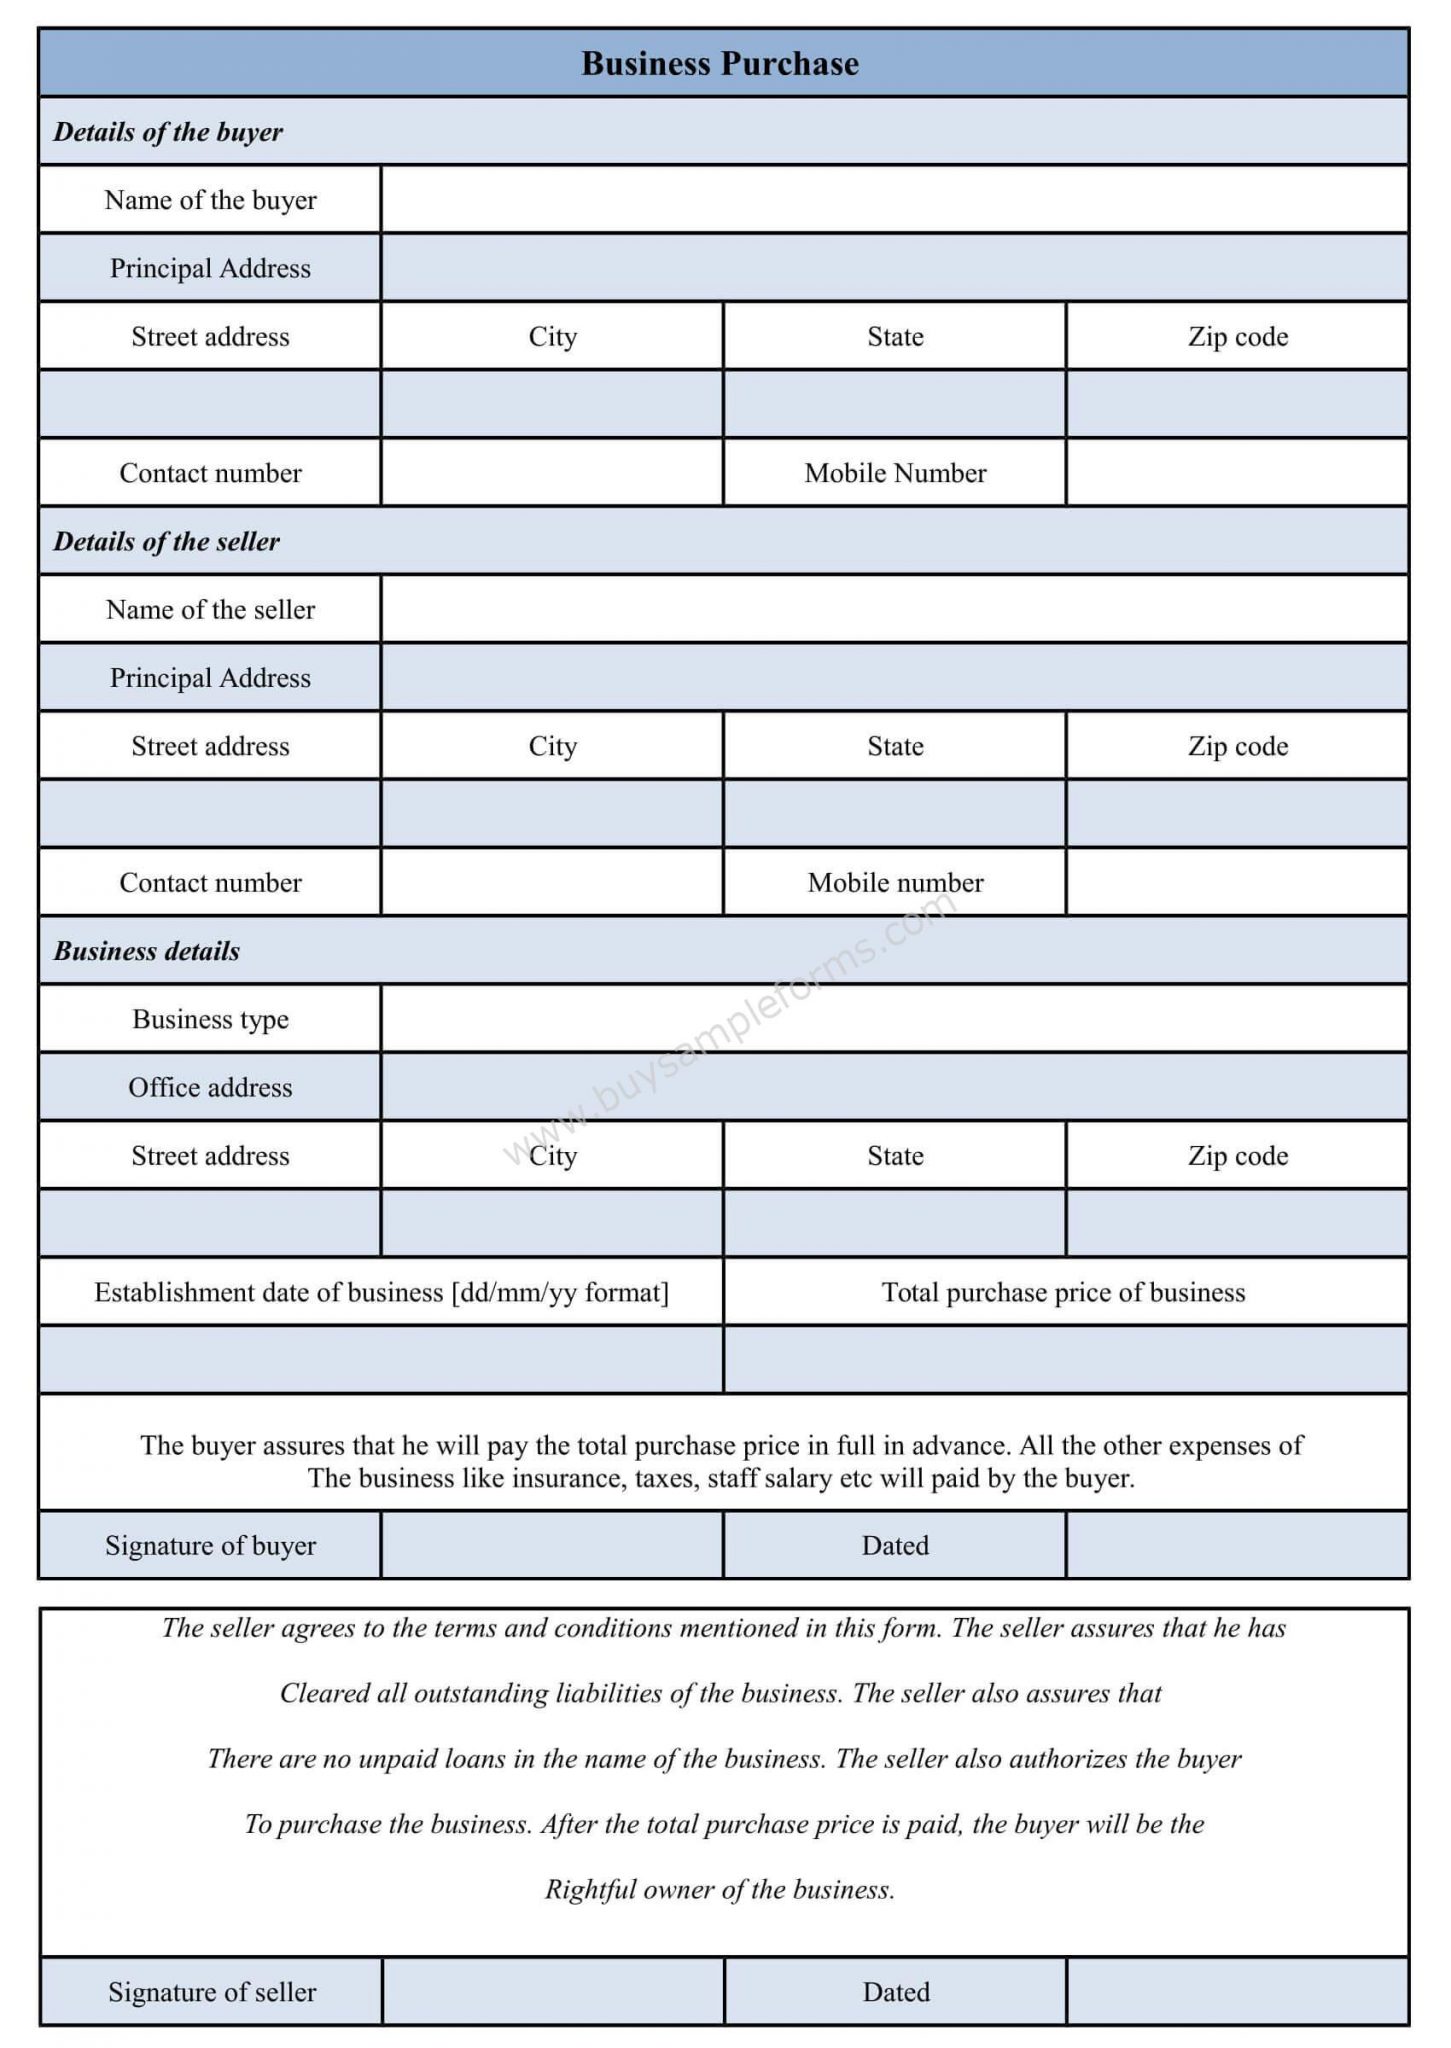 Sample Business Purchase Form Template